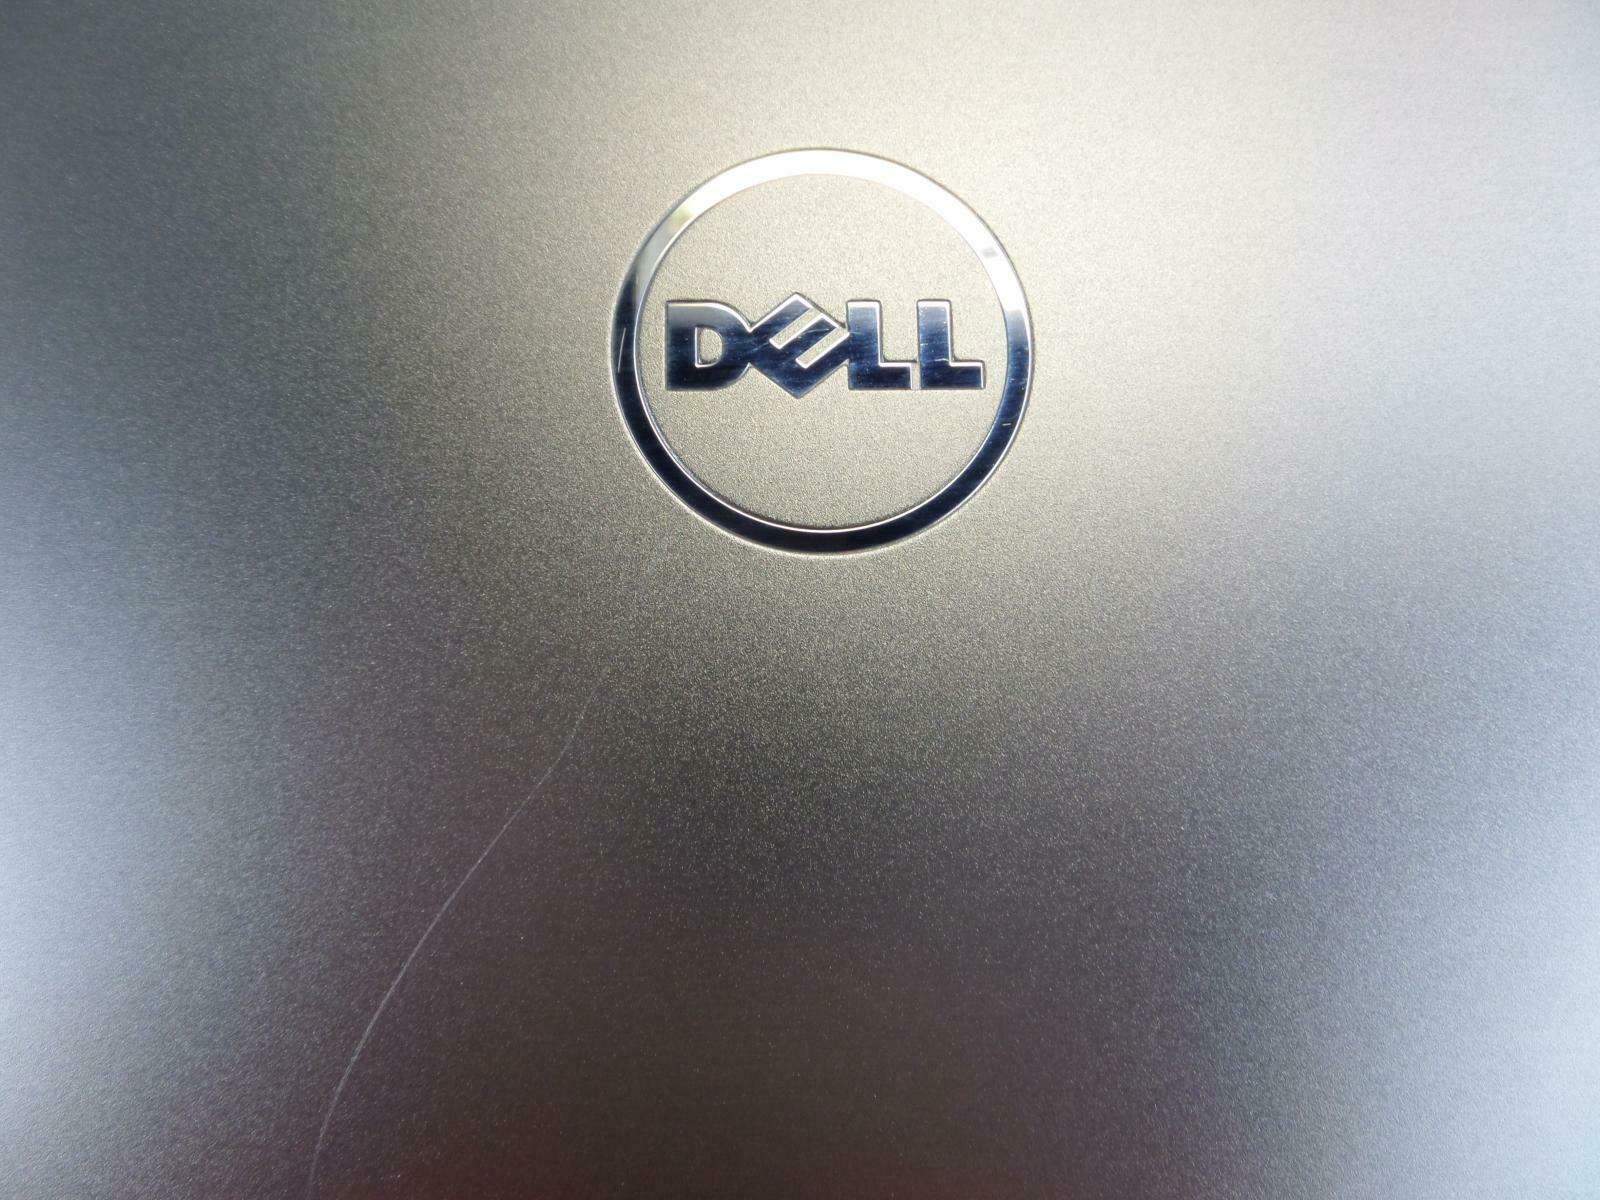 Dell Precision M4800 scratch on lid